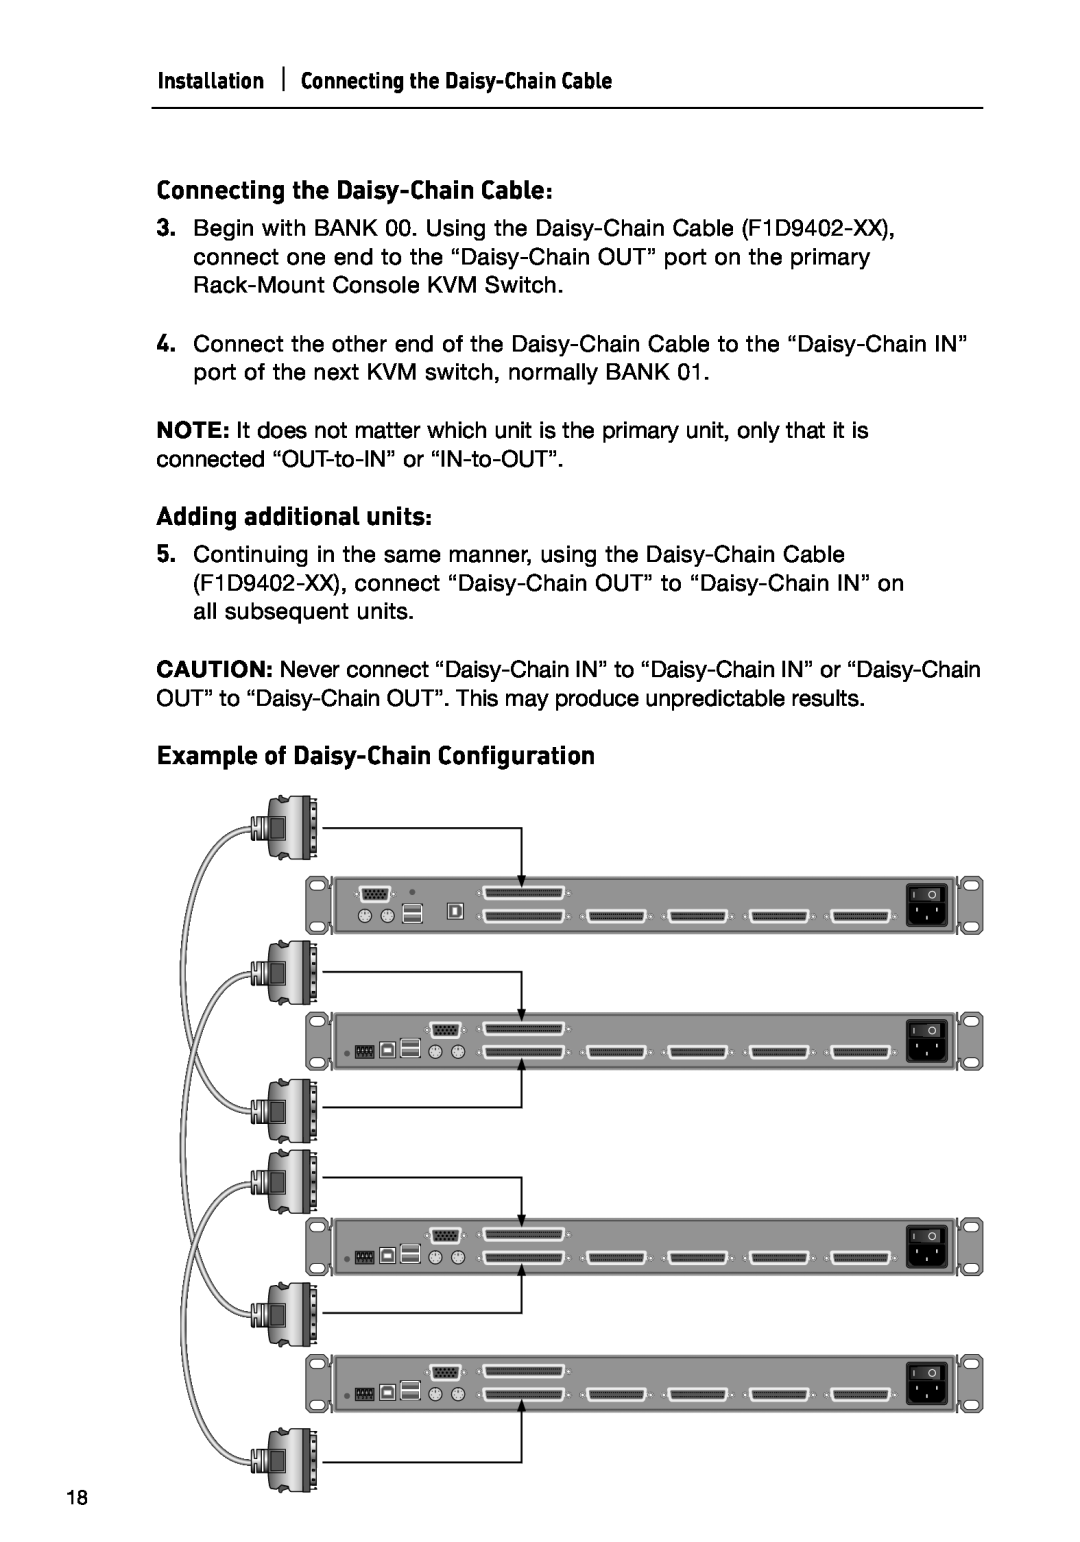 Belkin P74696 manual Connecting the Daisy-Chain Cable, Adding additional units, Example of Daisy-Chain Configuration 